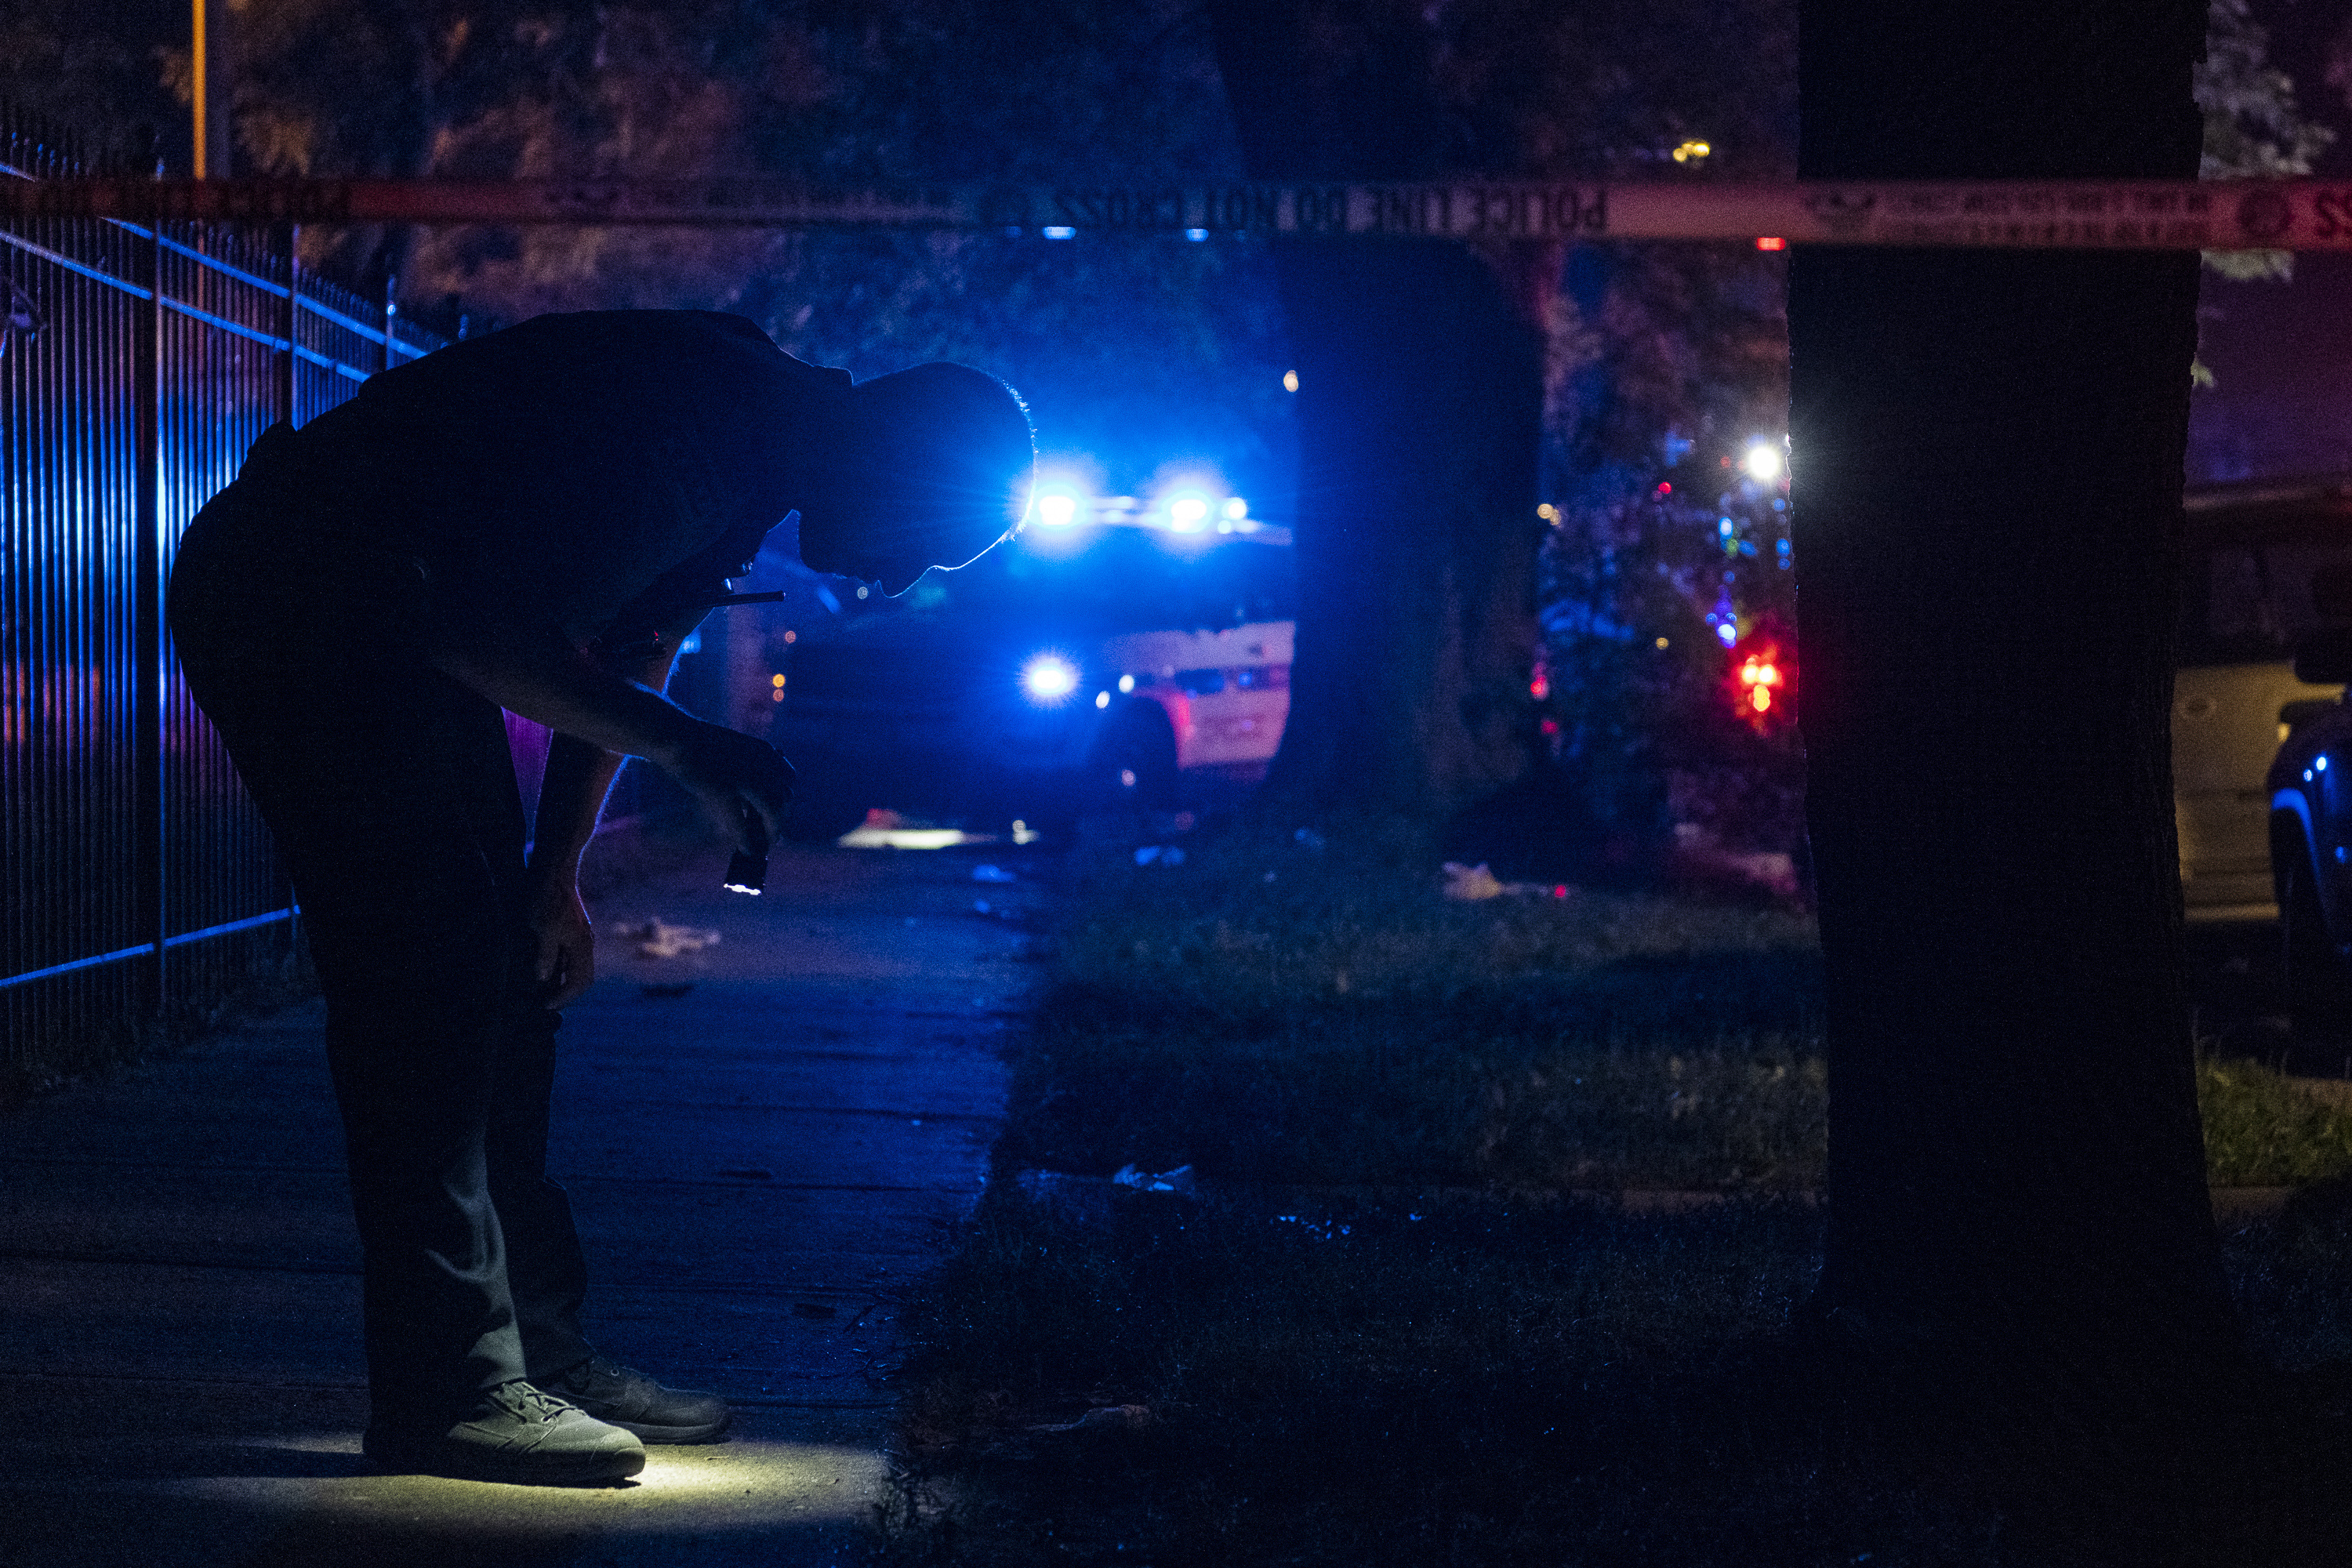 Chicago police investigate the scene where 8 people were shot, four of them fatally, in the Englewood neighborhood of Chicago on Saturday, July 4, 2020. A detailed report from the University of Illinois at Chicago reveals the strain and trauma that many frontline violence prevention workers face as they try to combat gun violence in the Chicago neighborhoods. (Tyler LaRiviere—AP)